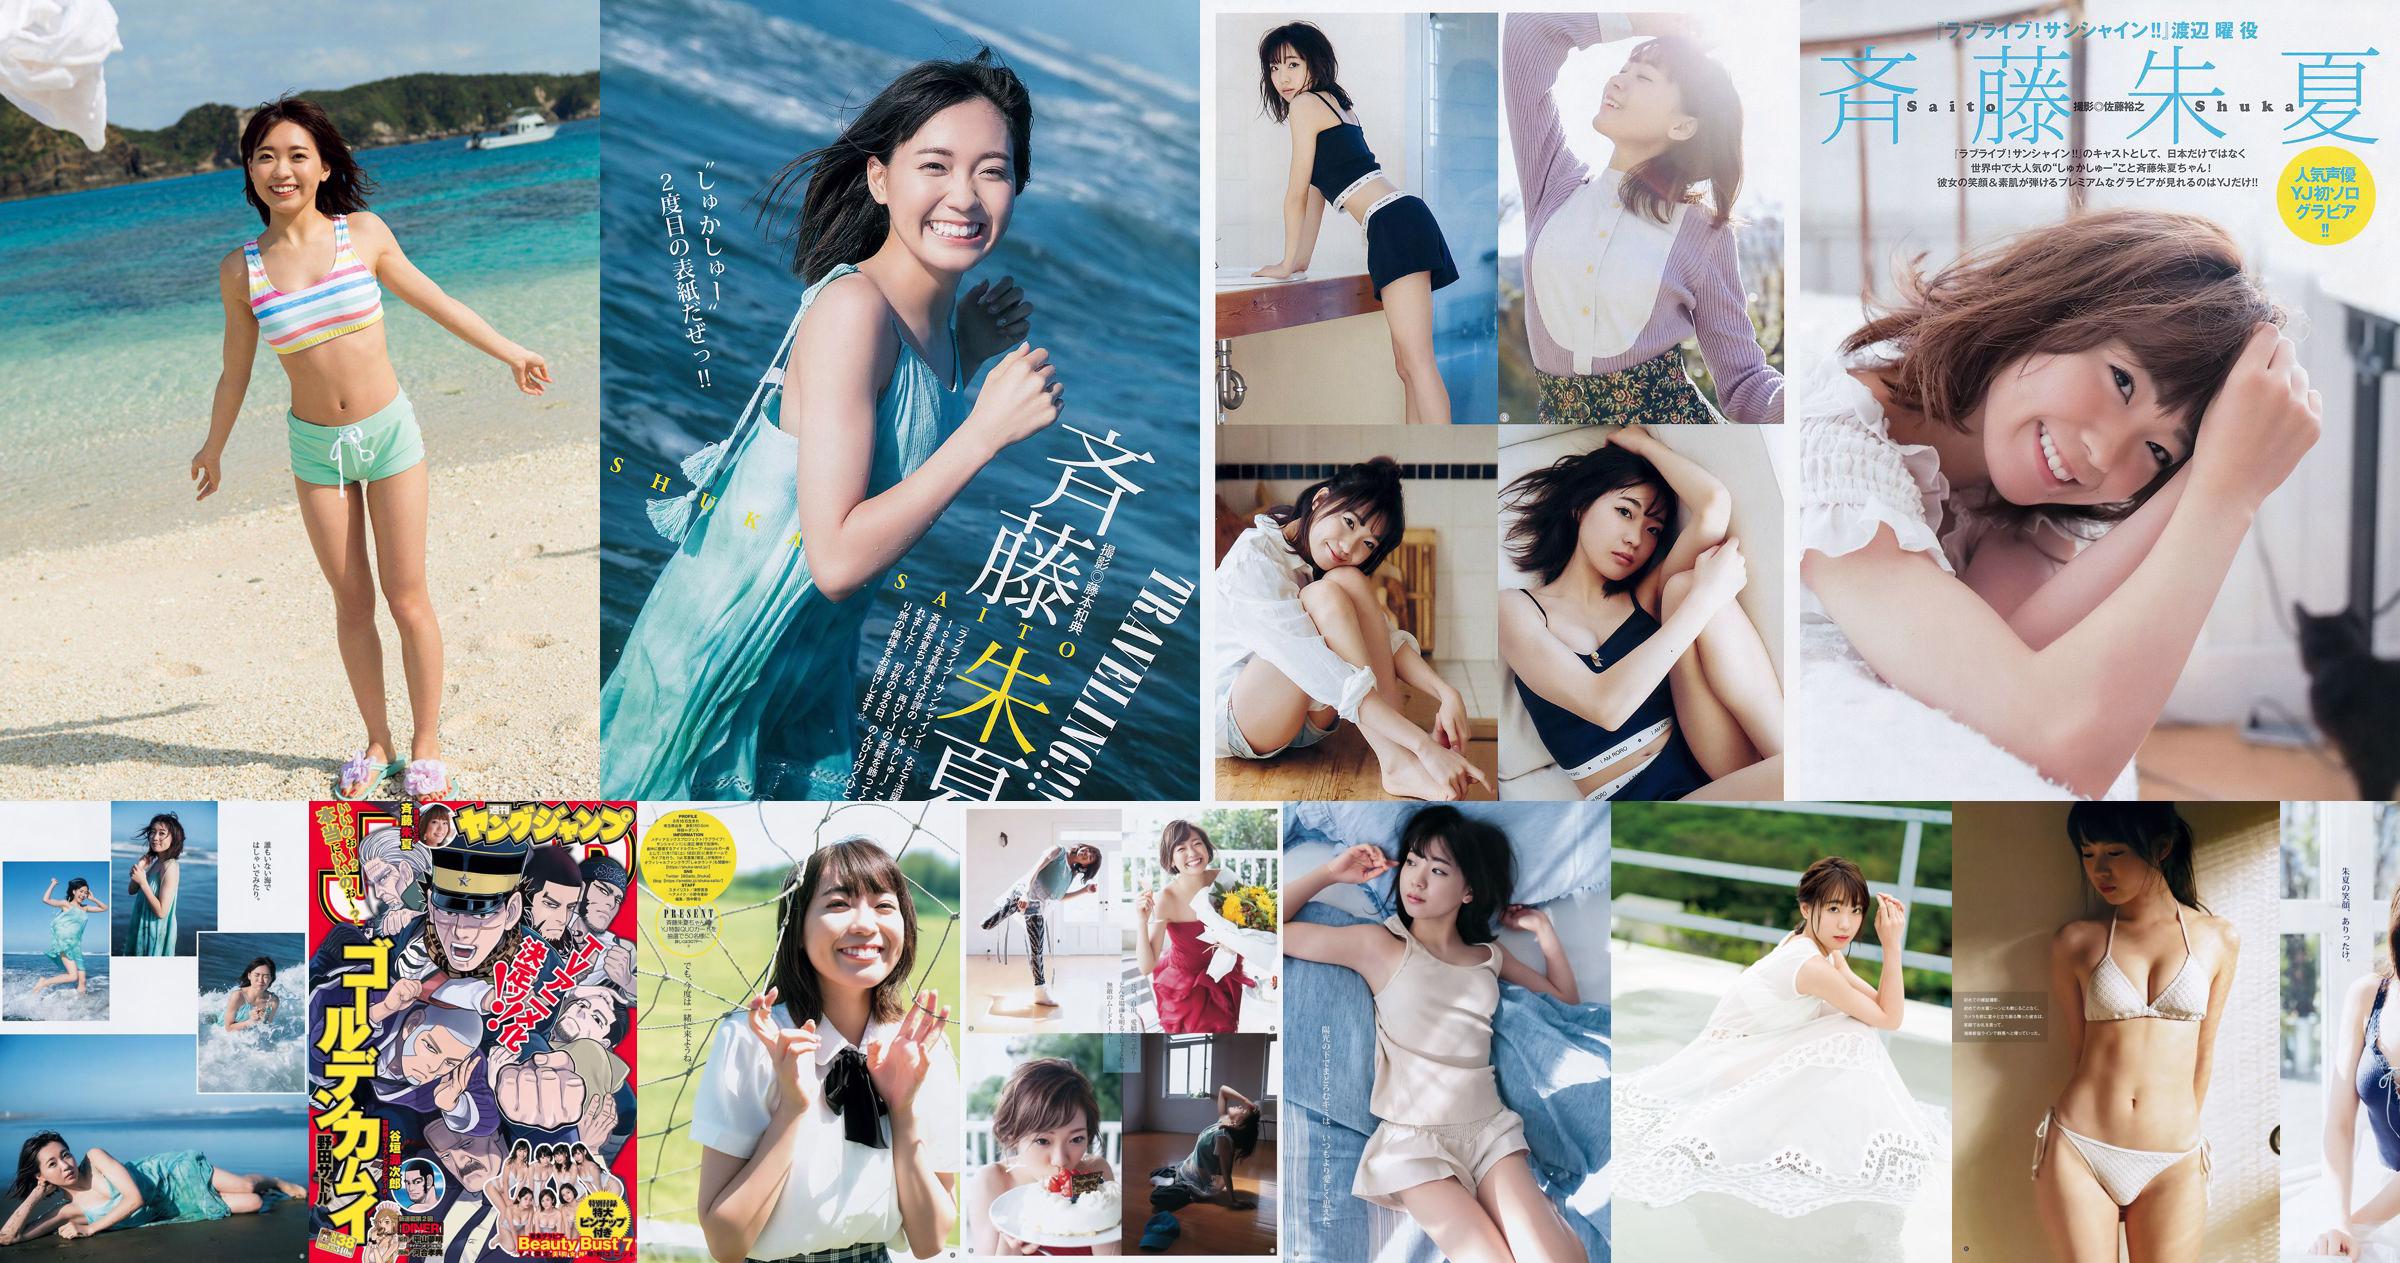 [FRIDAY] 《Shuka Saito 22-year-old first swimsuit exclusive release of the treasured cut of a popular big explosion voice actor》 Photo No.3b38a9 Page 1